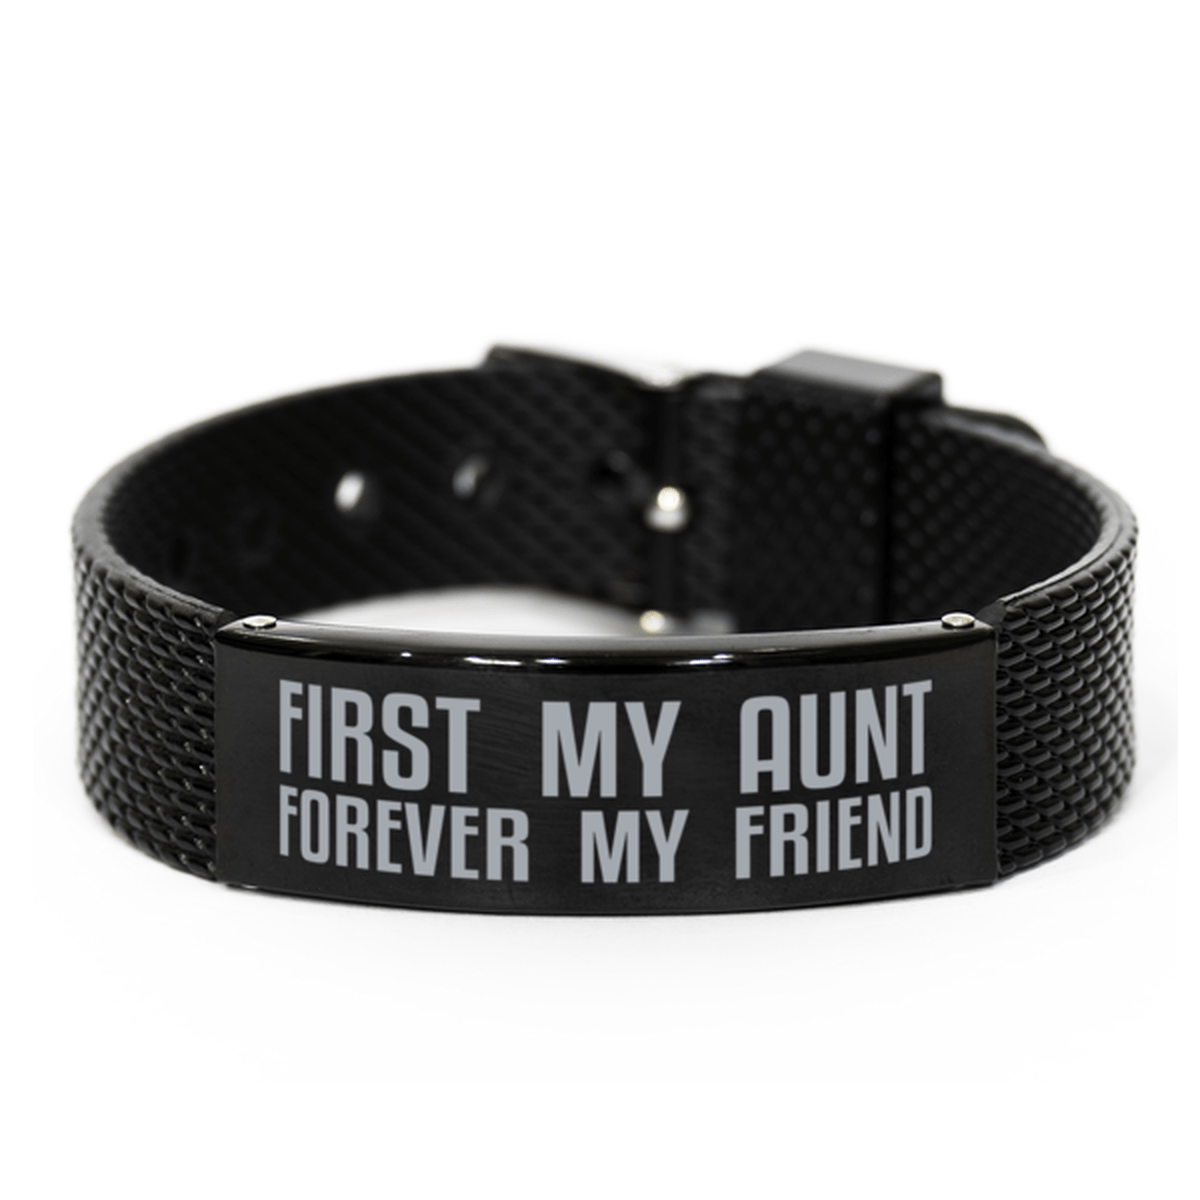 Unique Aunt Black Shark Mesh Bracelet, First My Aunt Forever My Friend, Best Gift for Aunt Birthday, Christmas